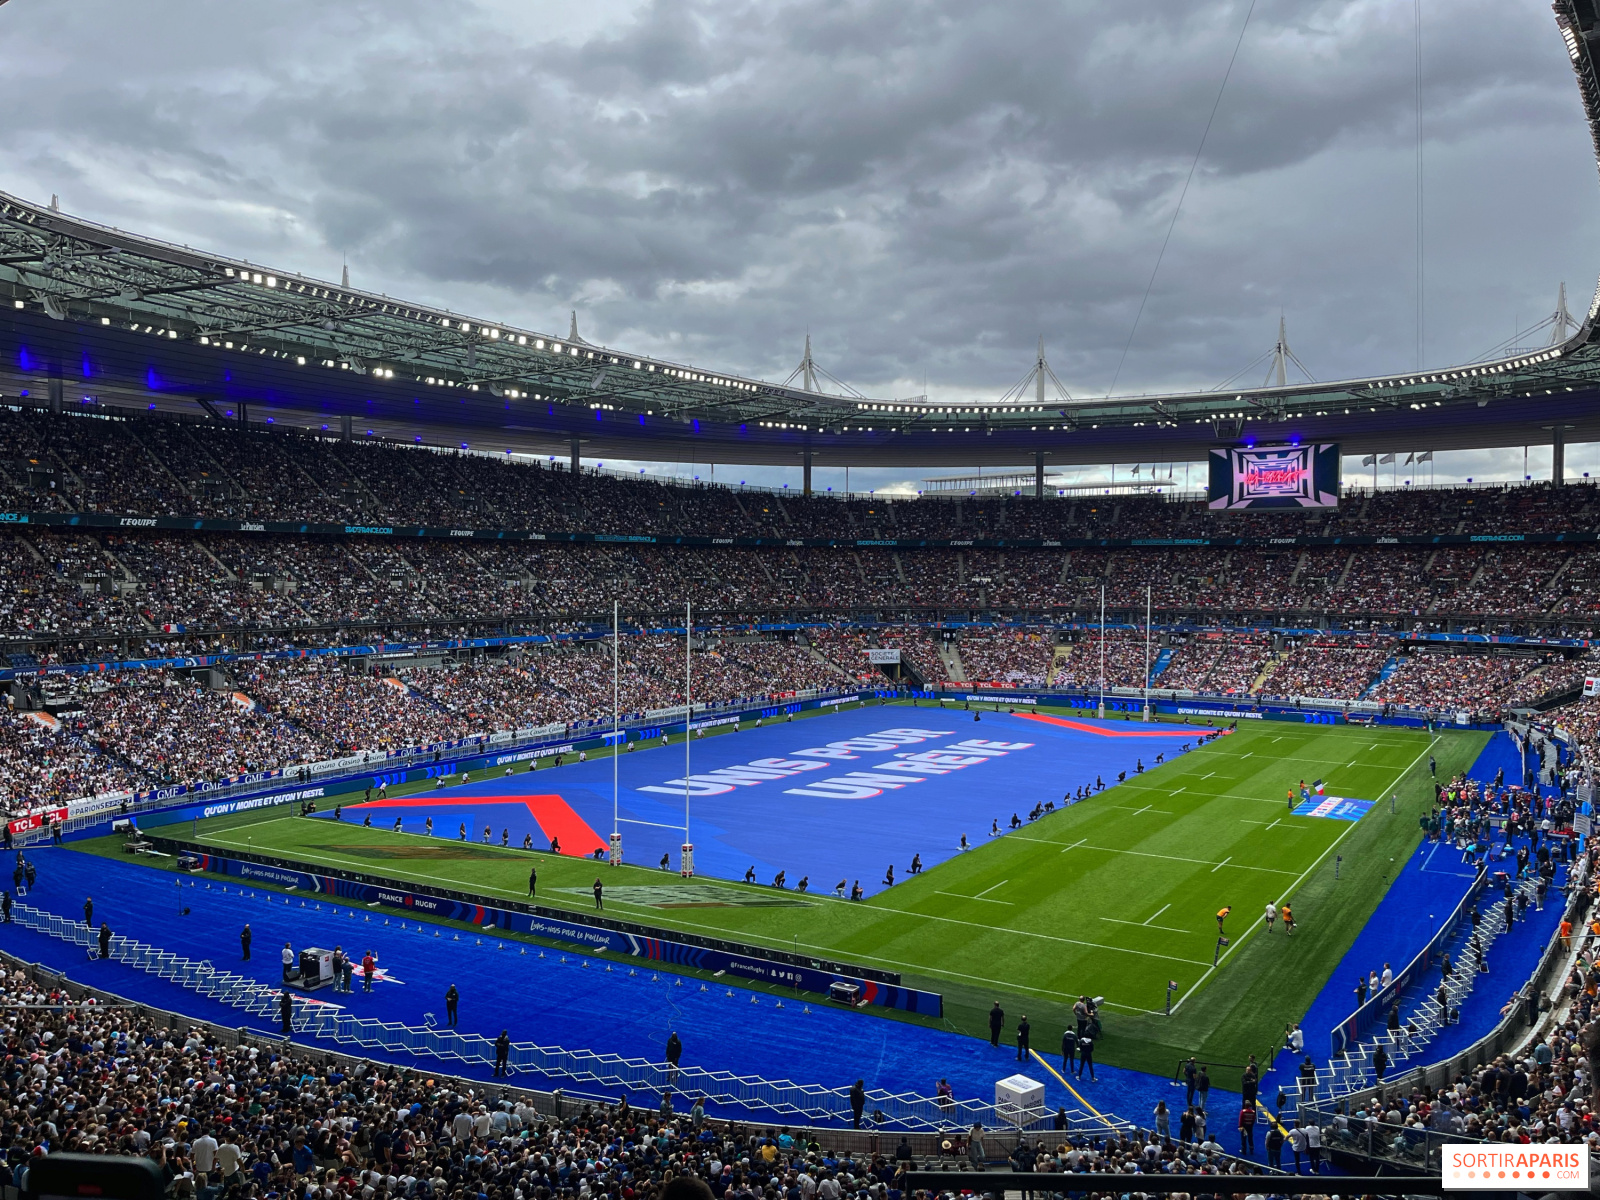 Rugby World Cup 2023: France vs New Zealand in the opening match at Stade de France